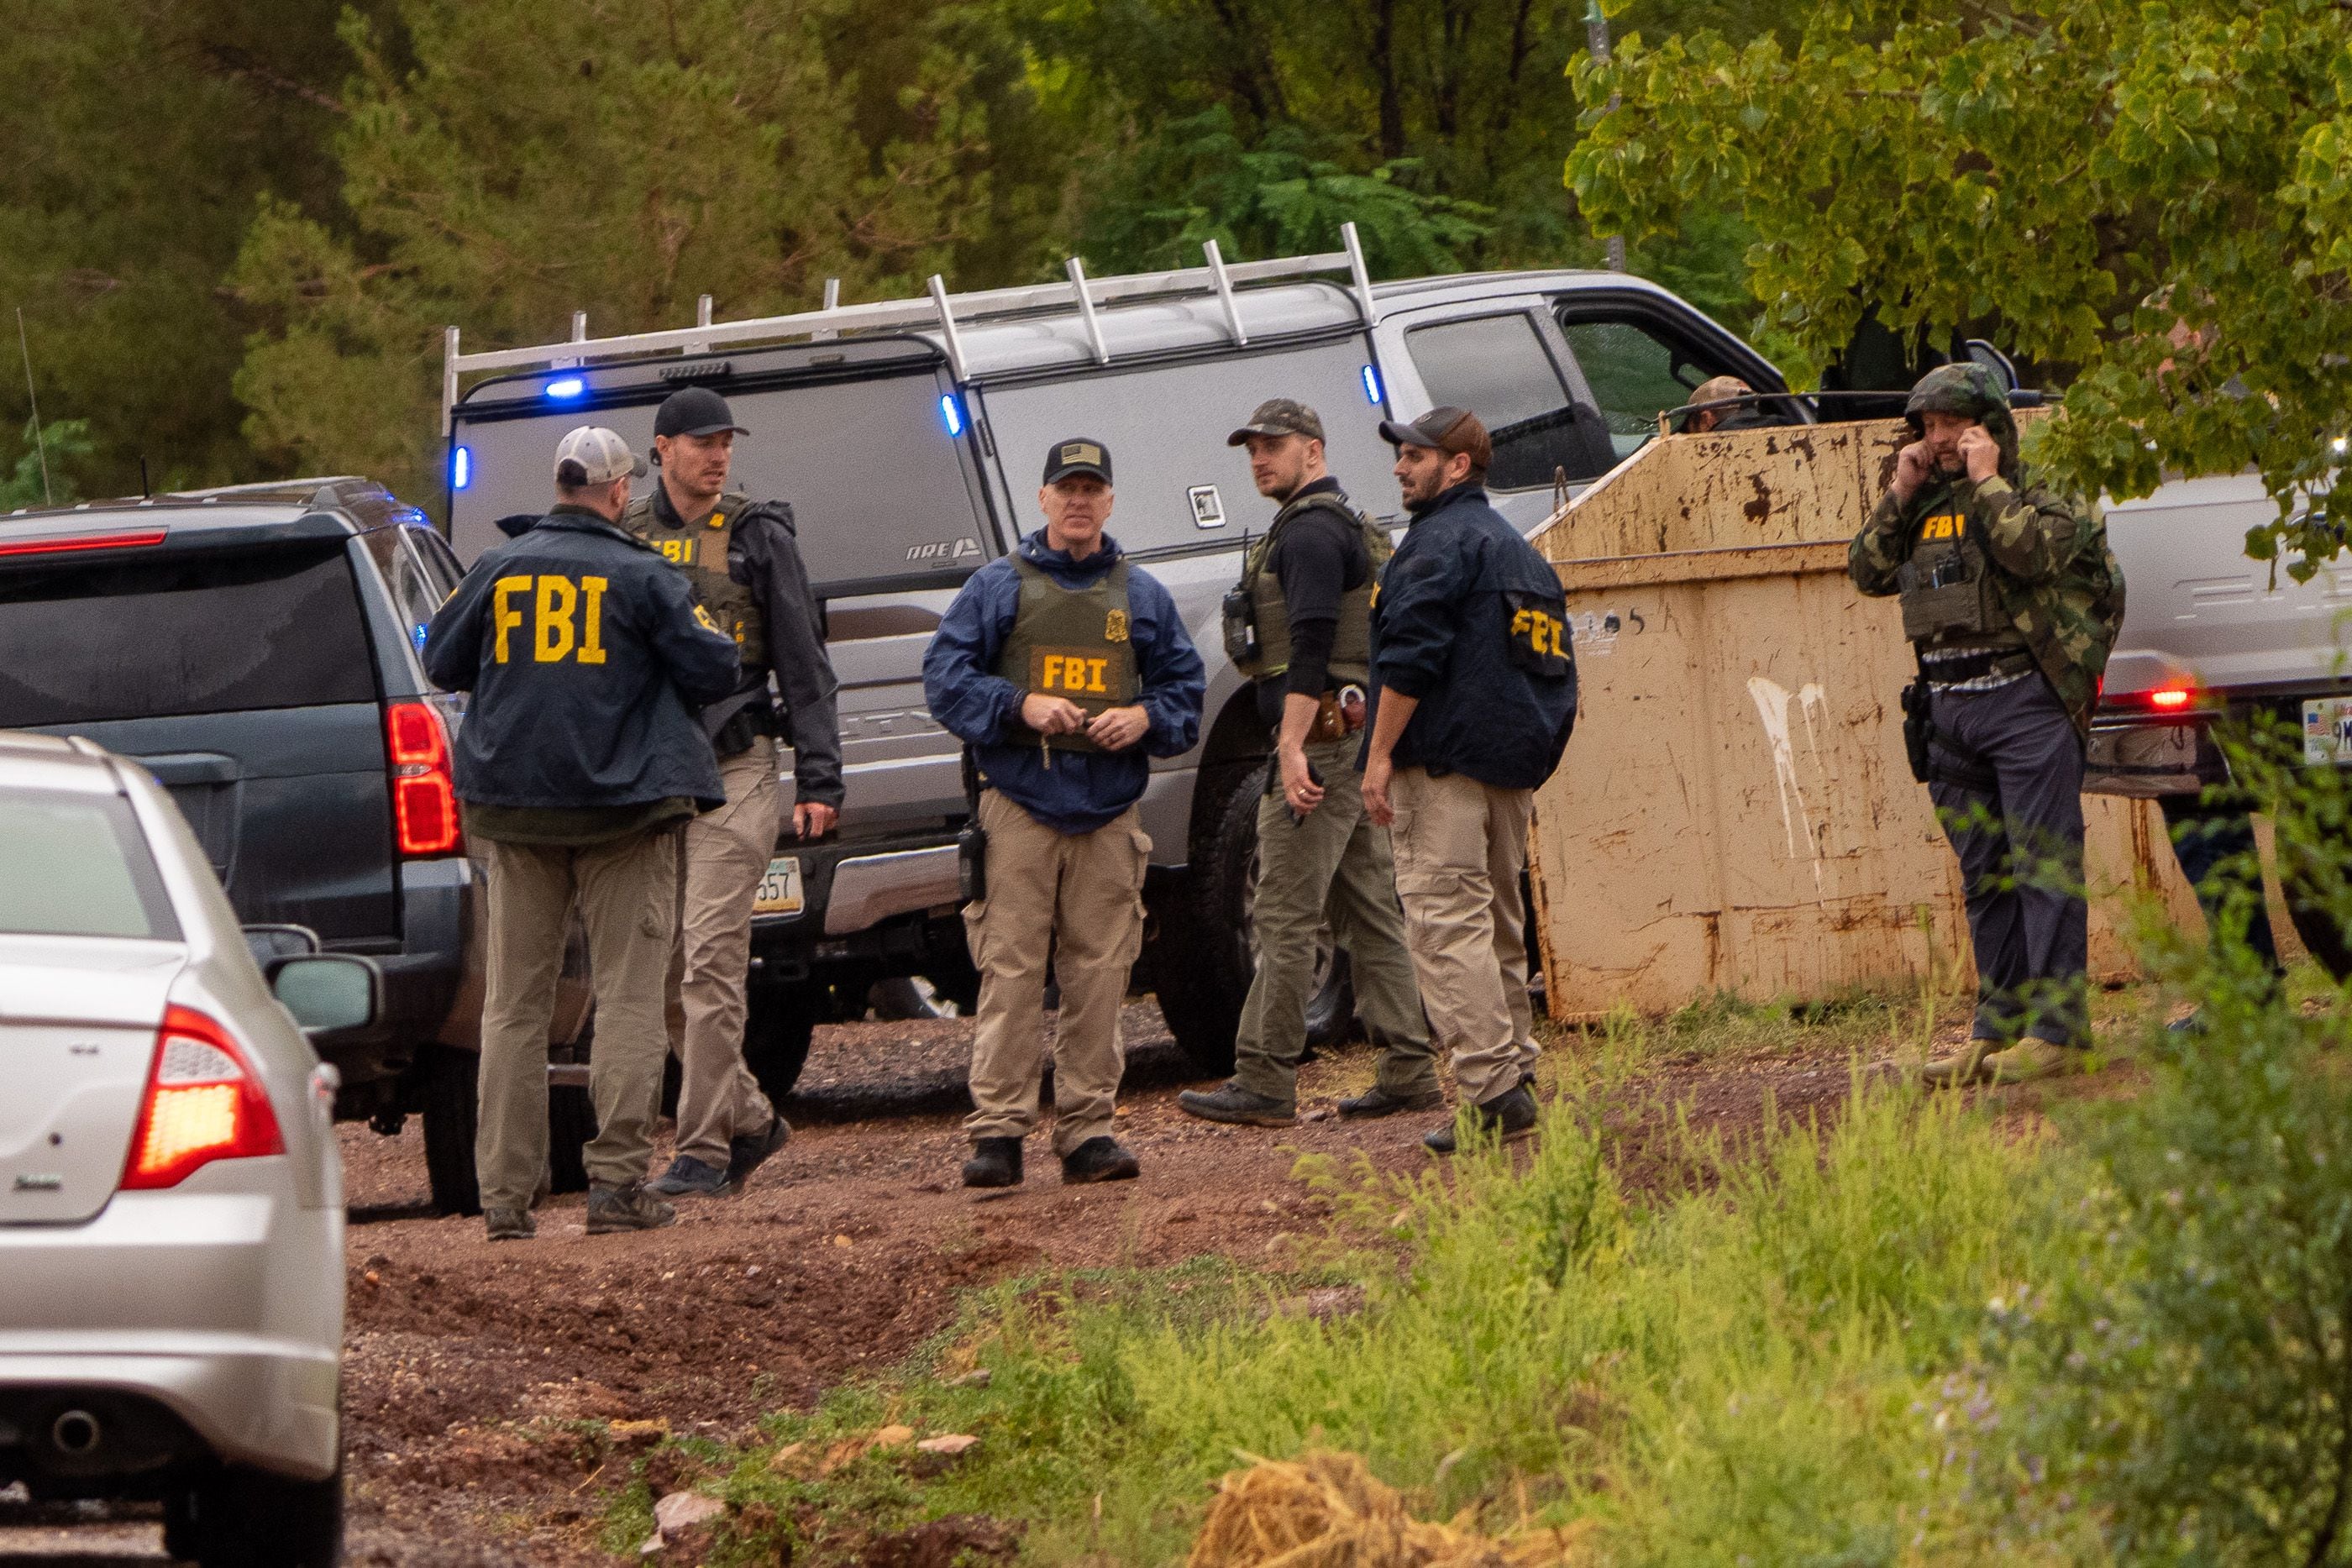 (Trent Nelson | The Salt Lake Tribune) FBI agents begin the search of a home where followers of Samuel Bateman live, in Colorado City, Ariz., on Tuesday, Sept. 13, 2022.